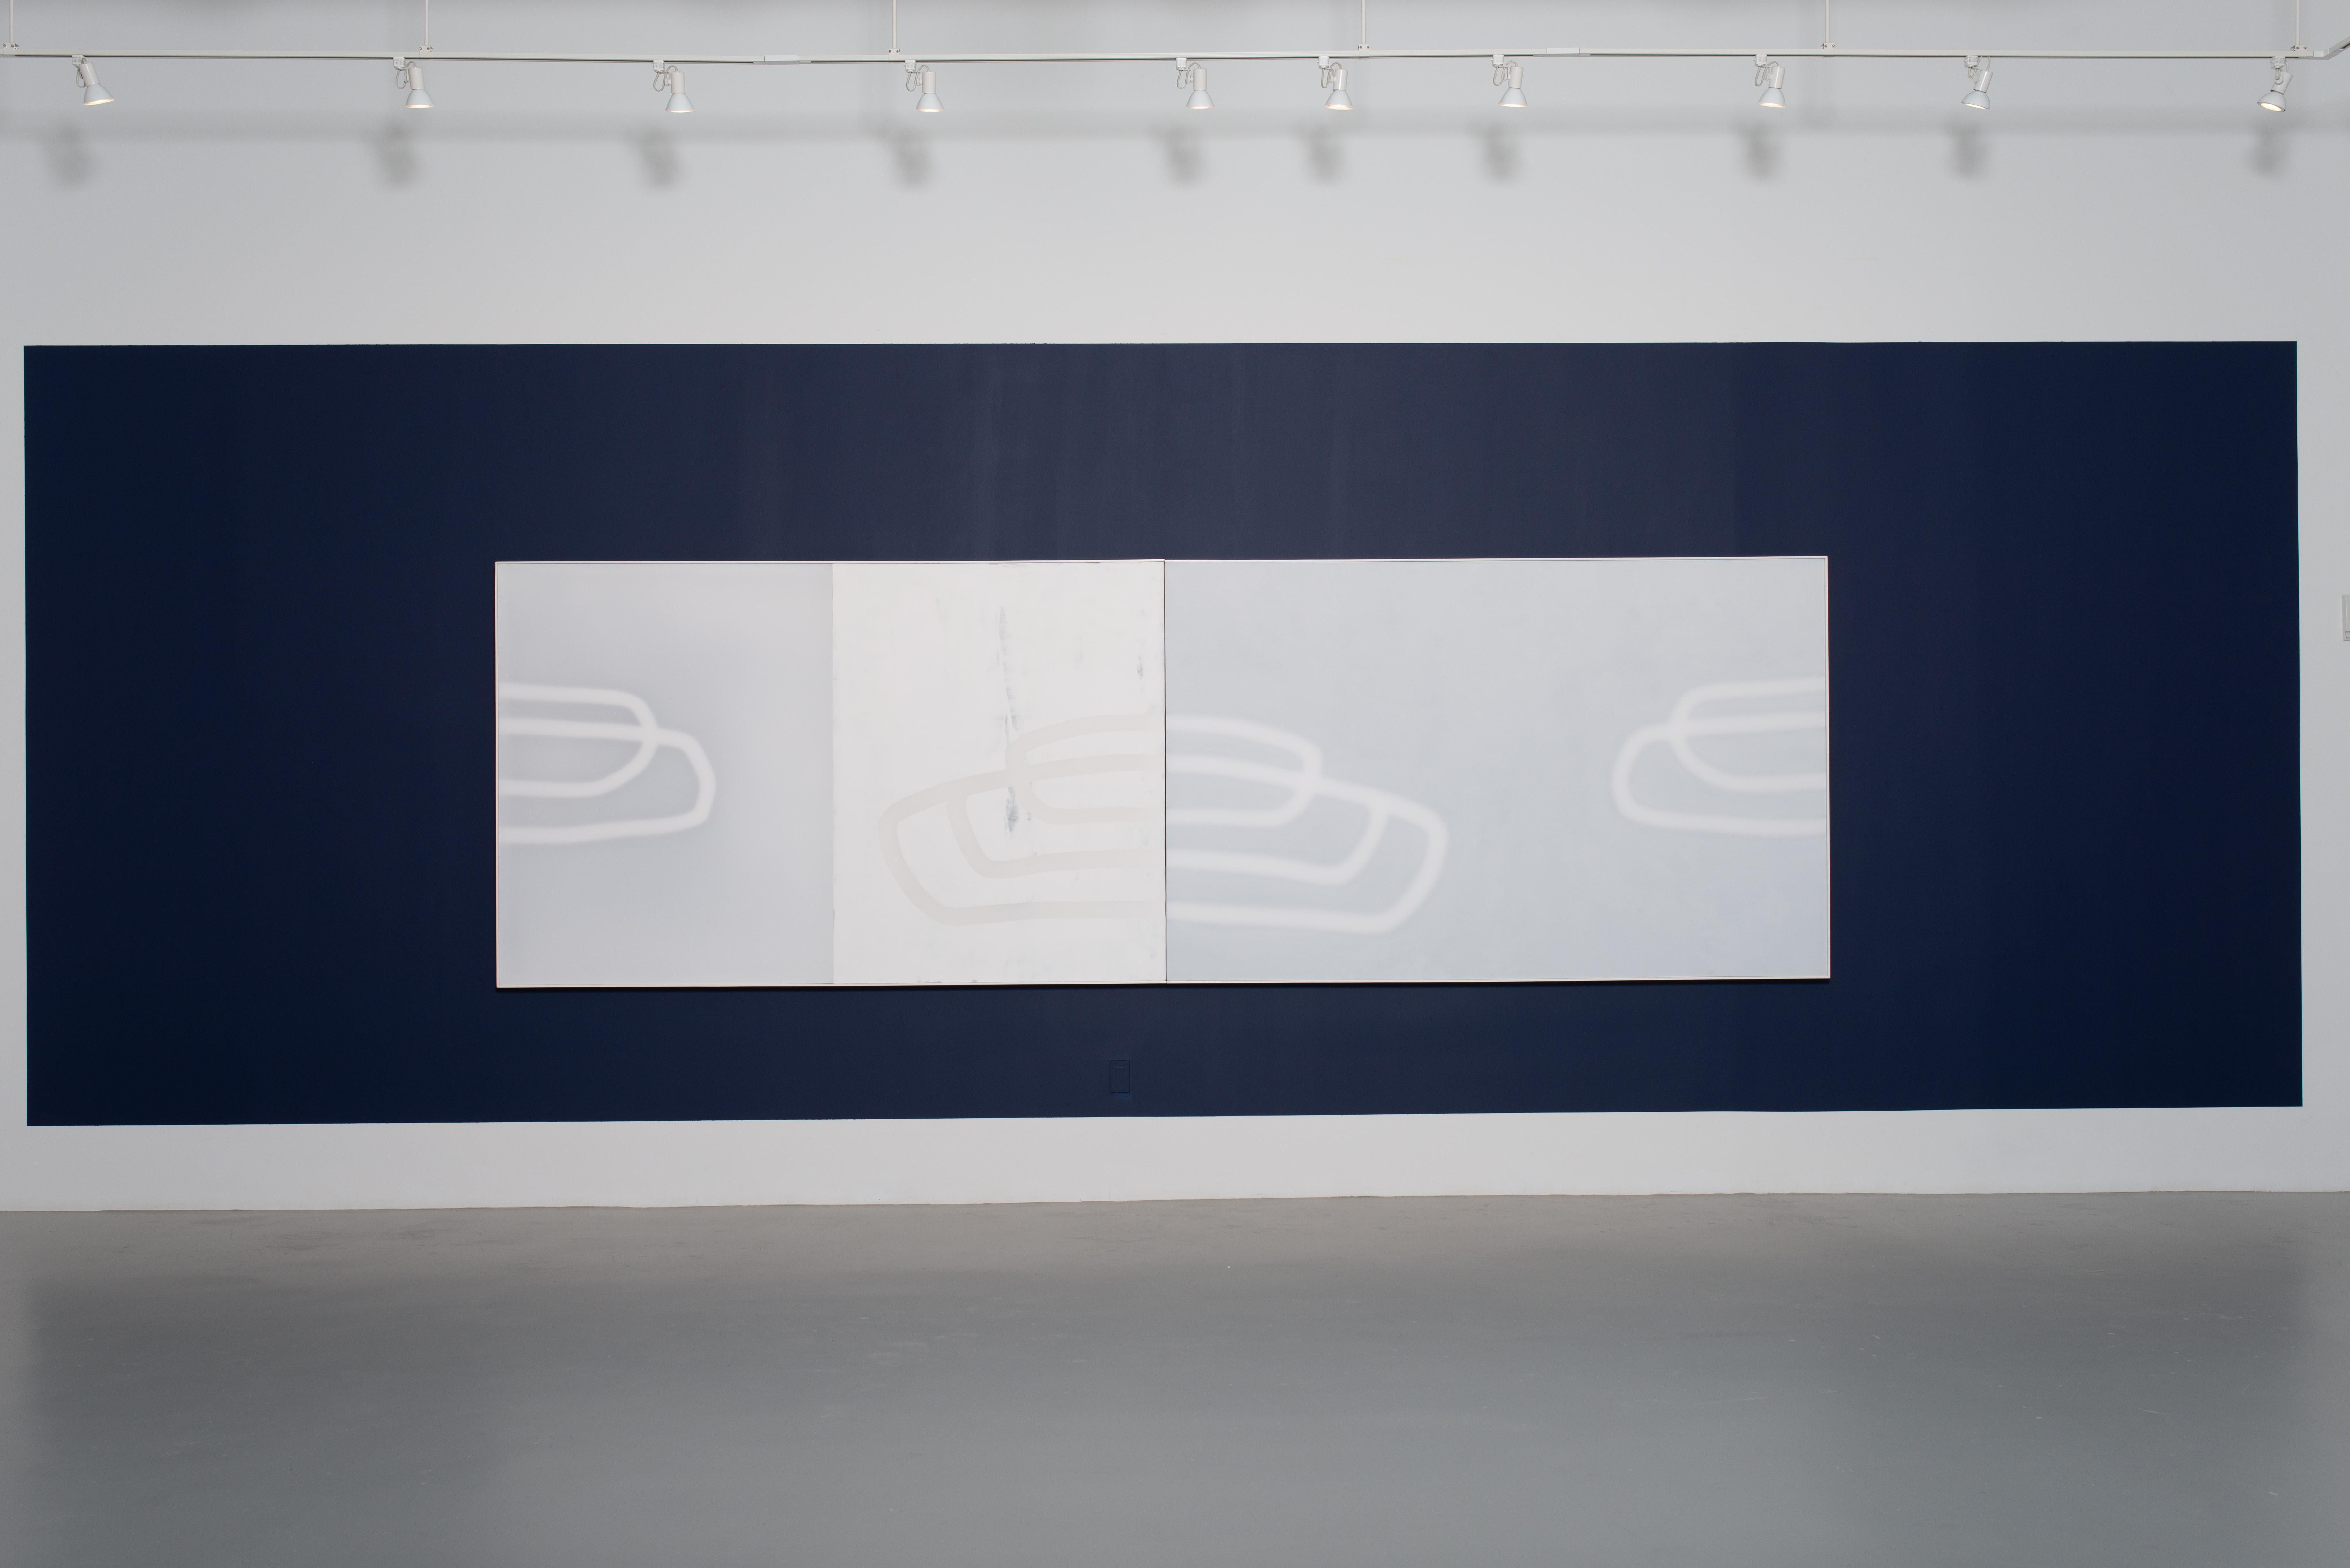 But there is Day and Night 1, 2019
Mixed media on canvas
61 x 192 inches
155 x 488 cm

Udo Nöger creates luminous monochrome paintings that capture light, movement and energy expressed in highly minimalistic compositions. Nöger, who grew up in